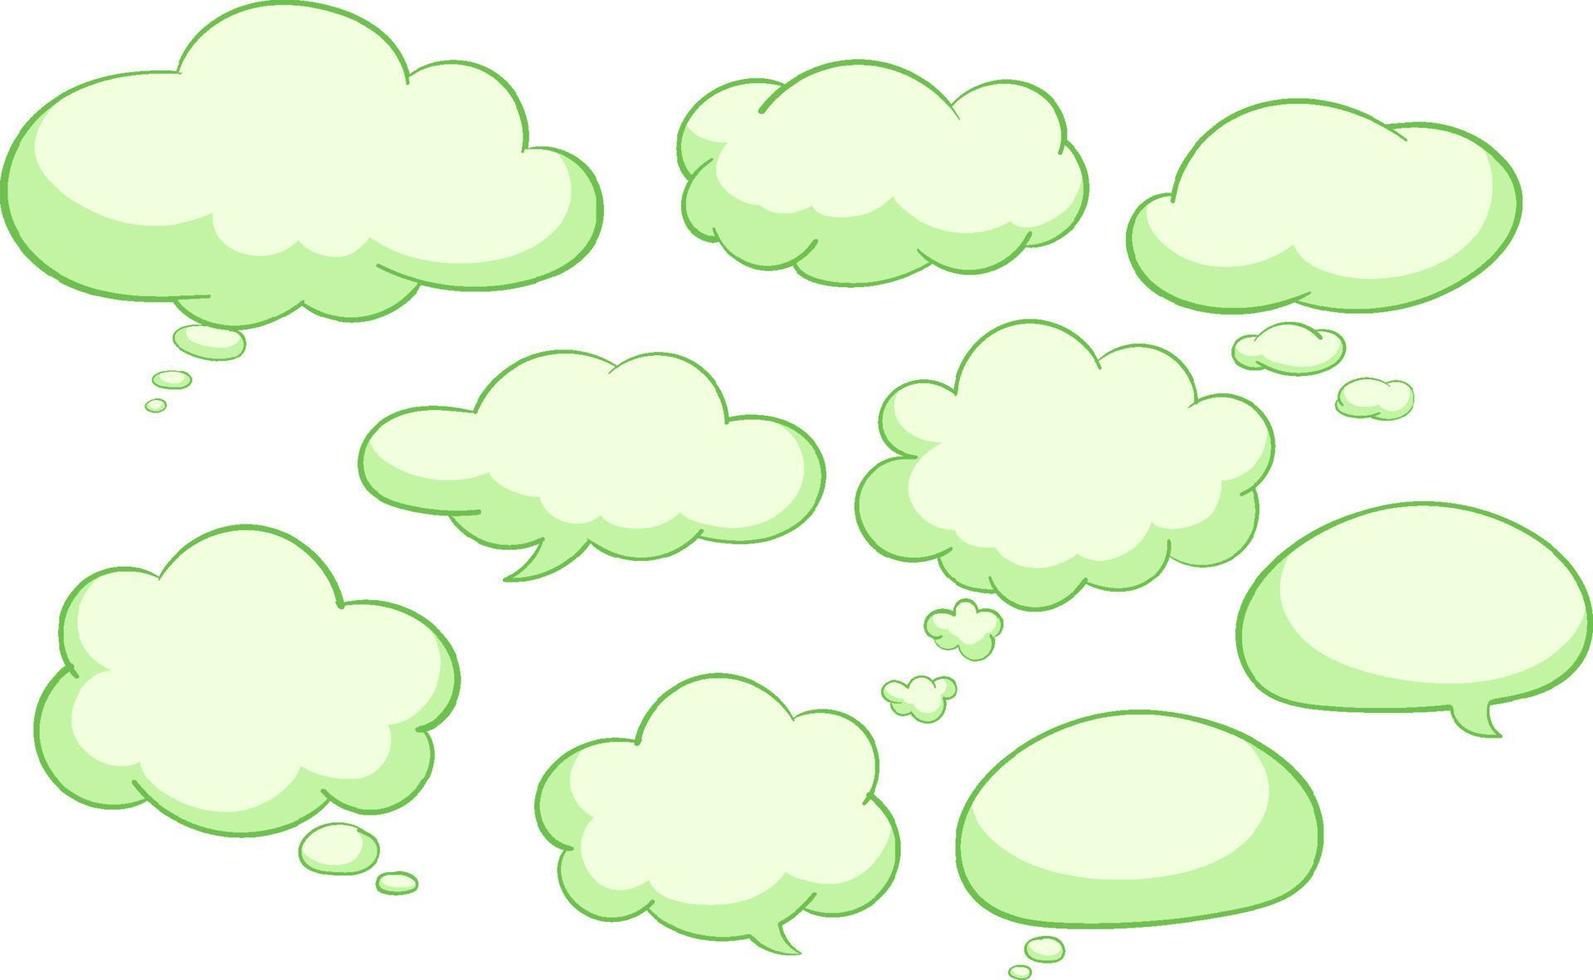 Speech bubble templates on white background vector